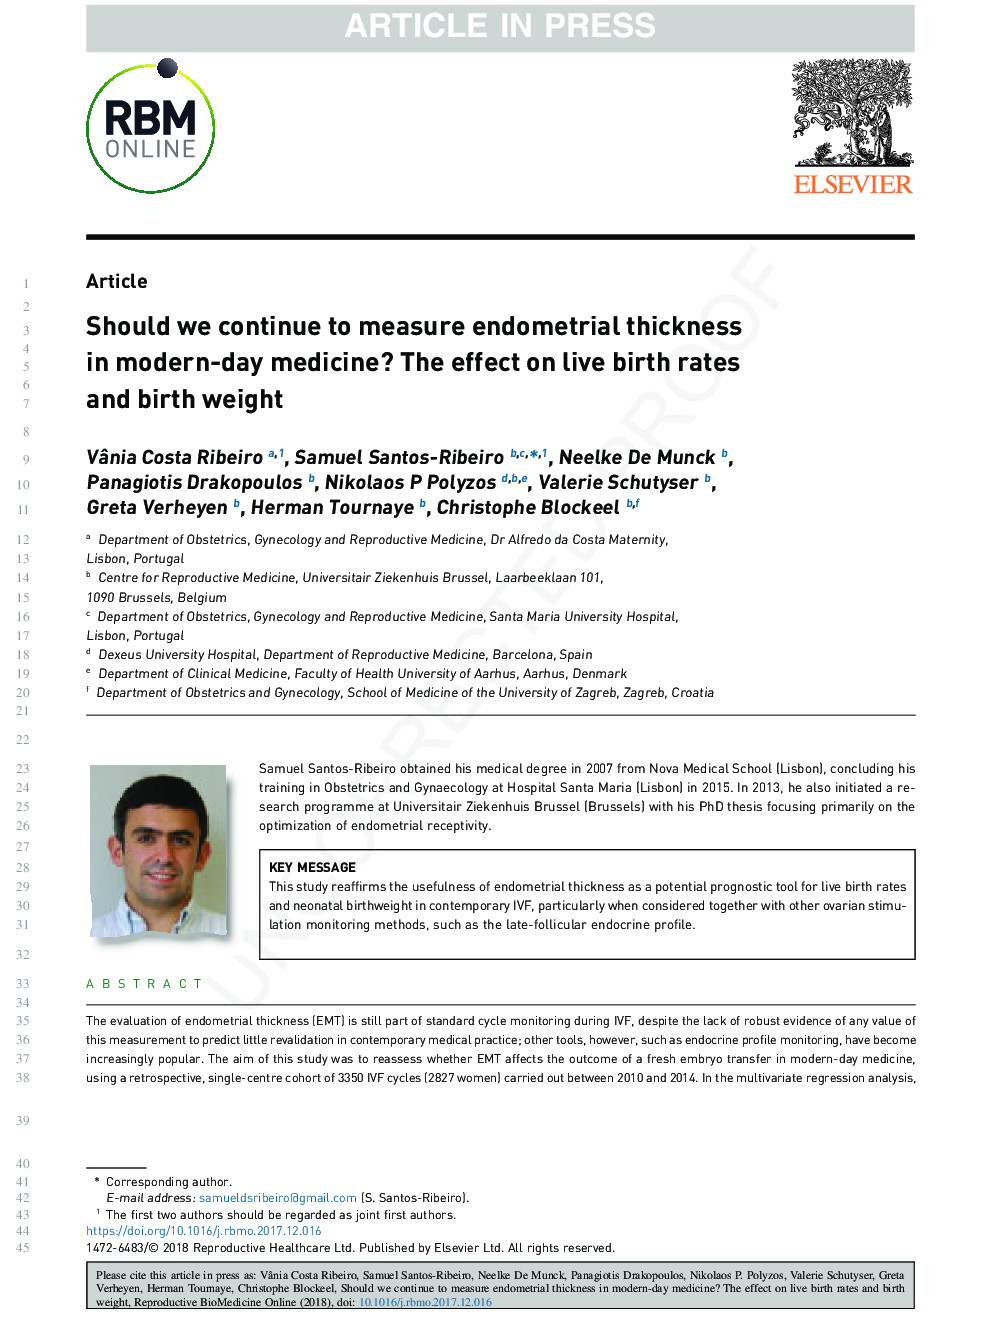 Should we continue to measure endometrial thickness in modern-day medicine? The effect on live birth rates and birth weight